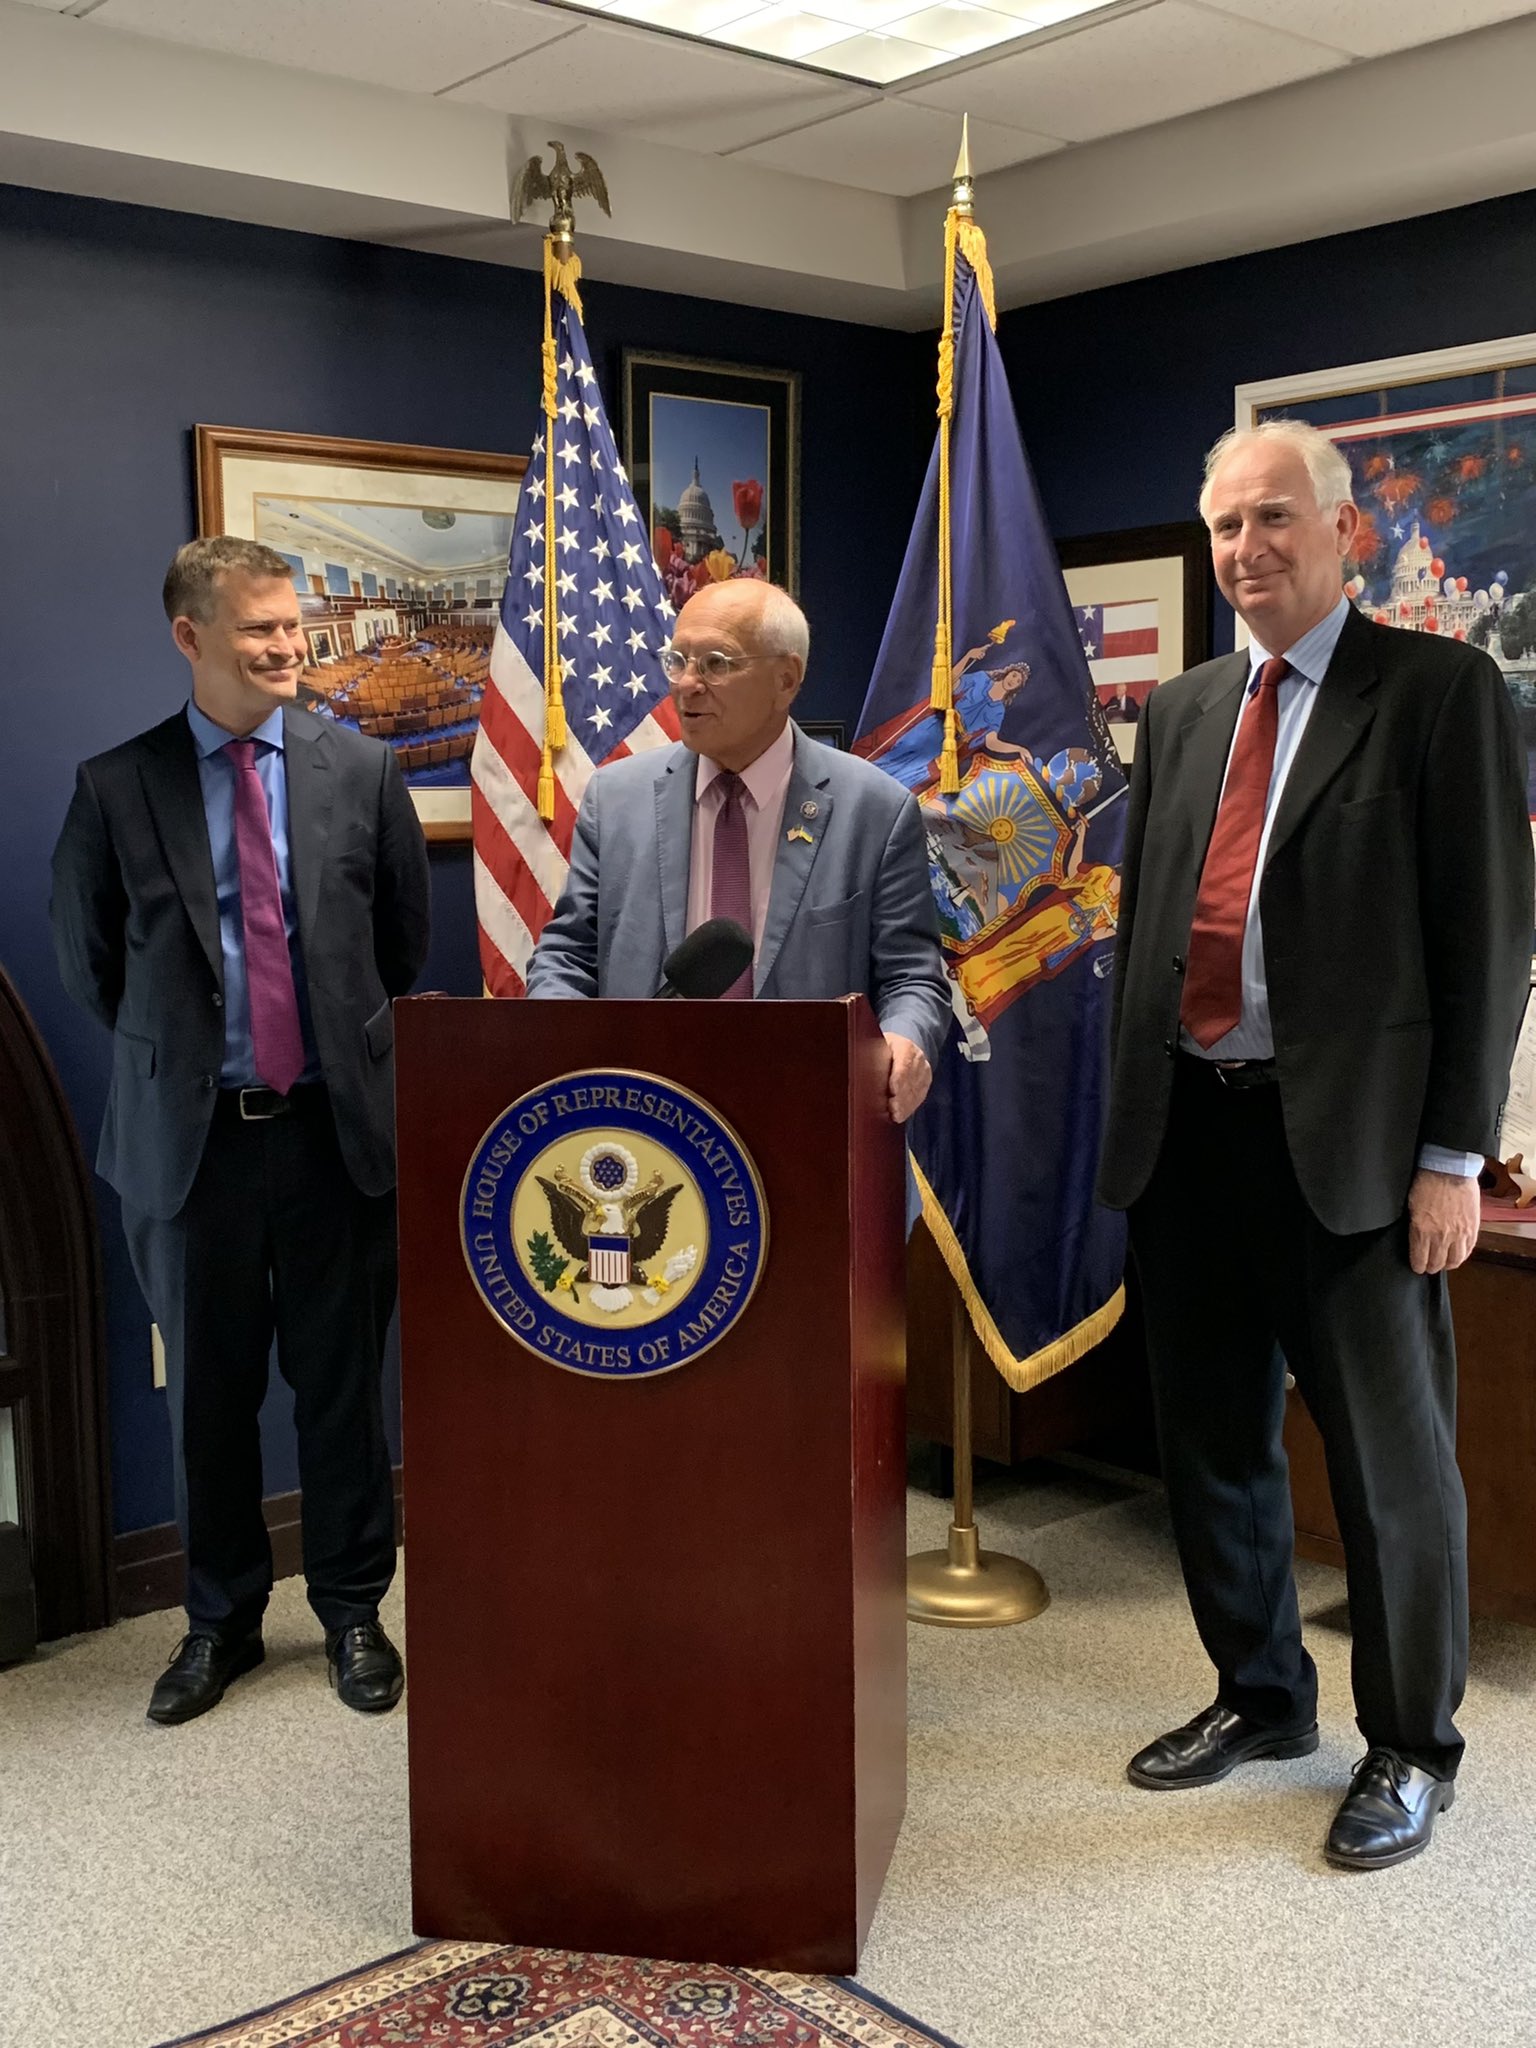 Representative Paul Tonko (D, NY-21) welcomes Justin Madders and Daniel Zeichner, Members of the British Parliament, to New York on their IVLP exchange.